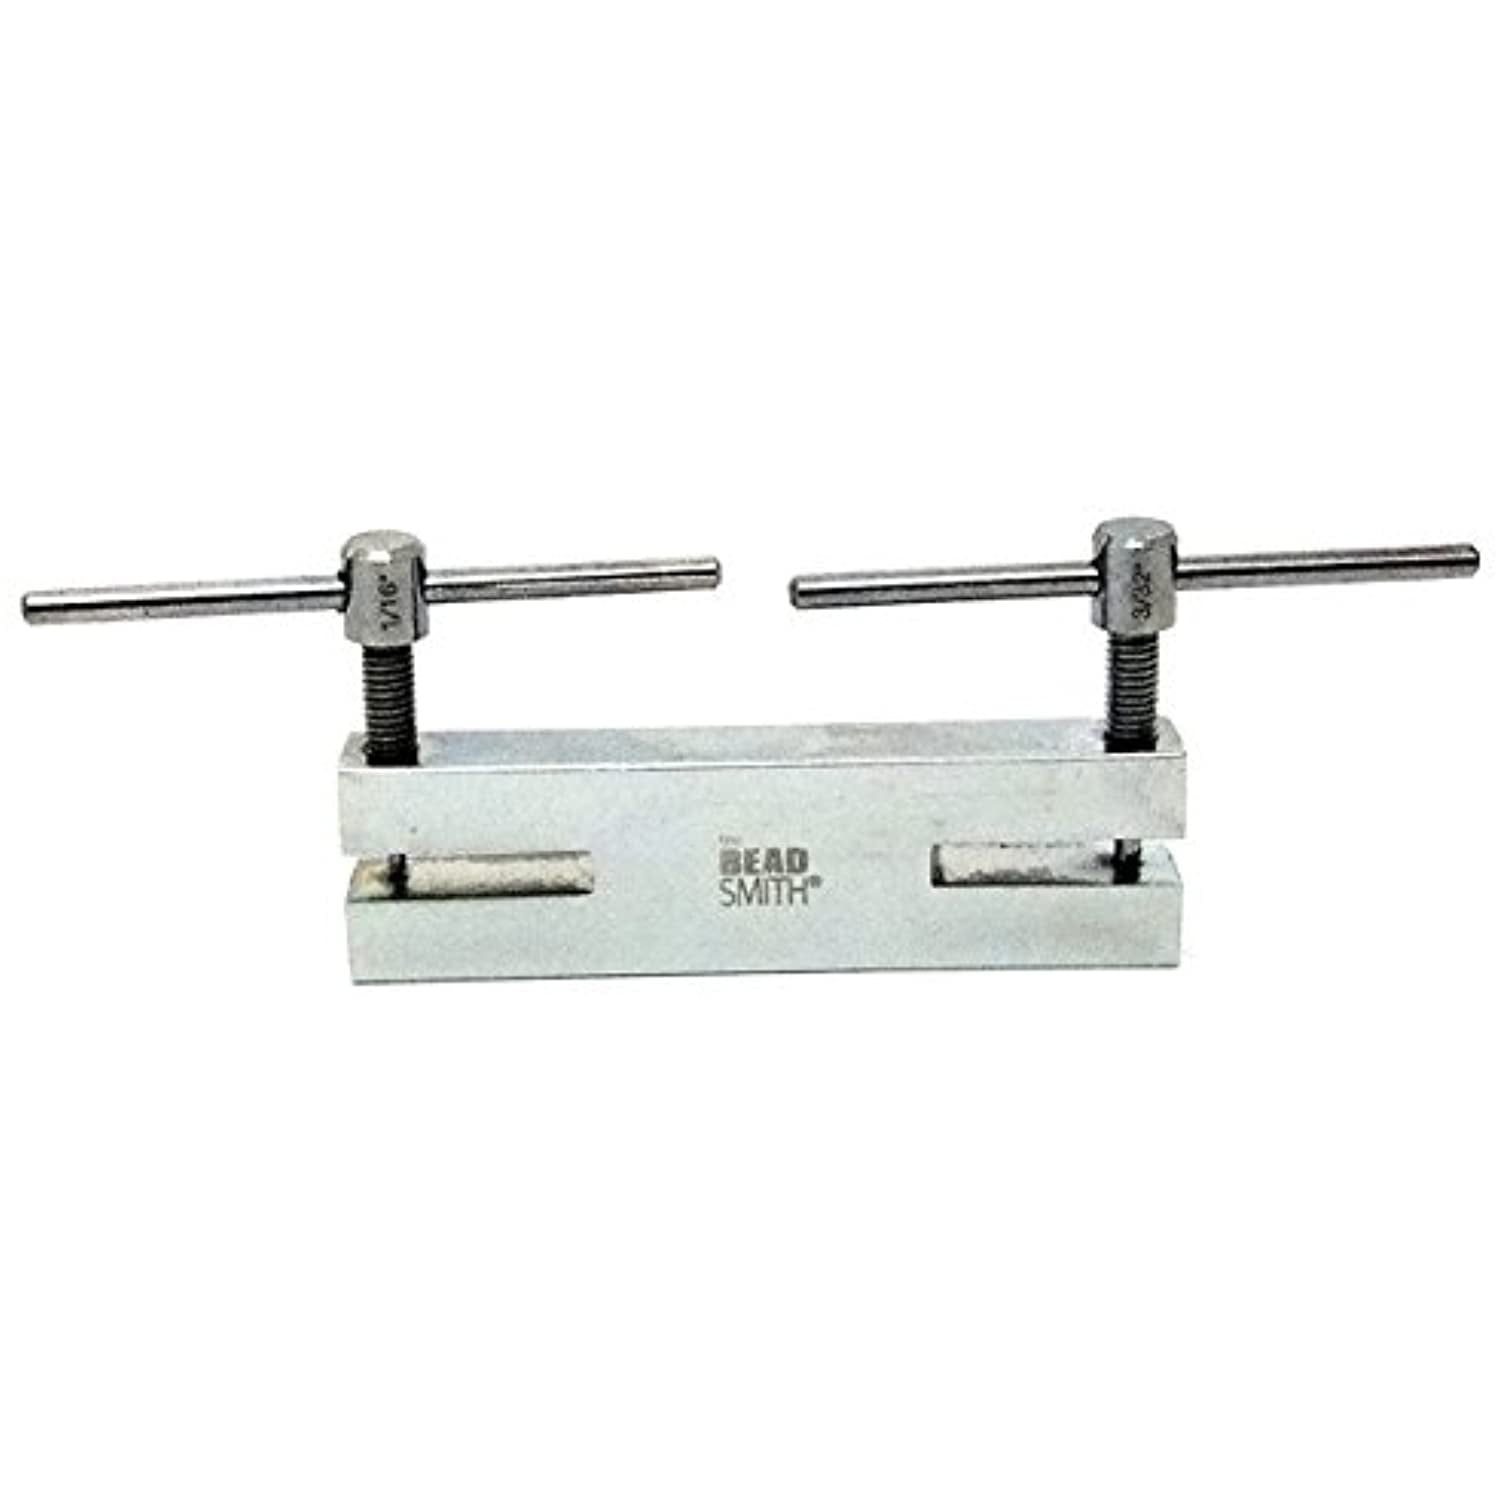 Beadsmith Two Hole Double Metal Punch 1.6/2.4mm LPUNCH3